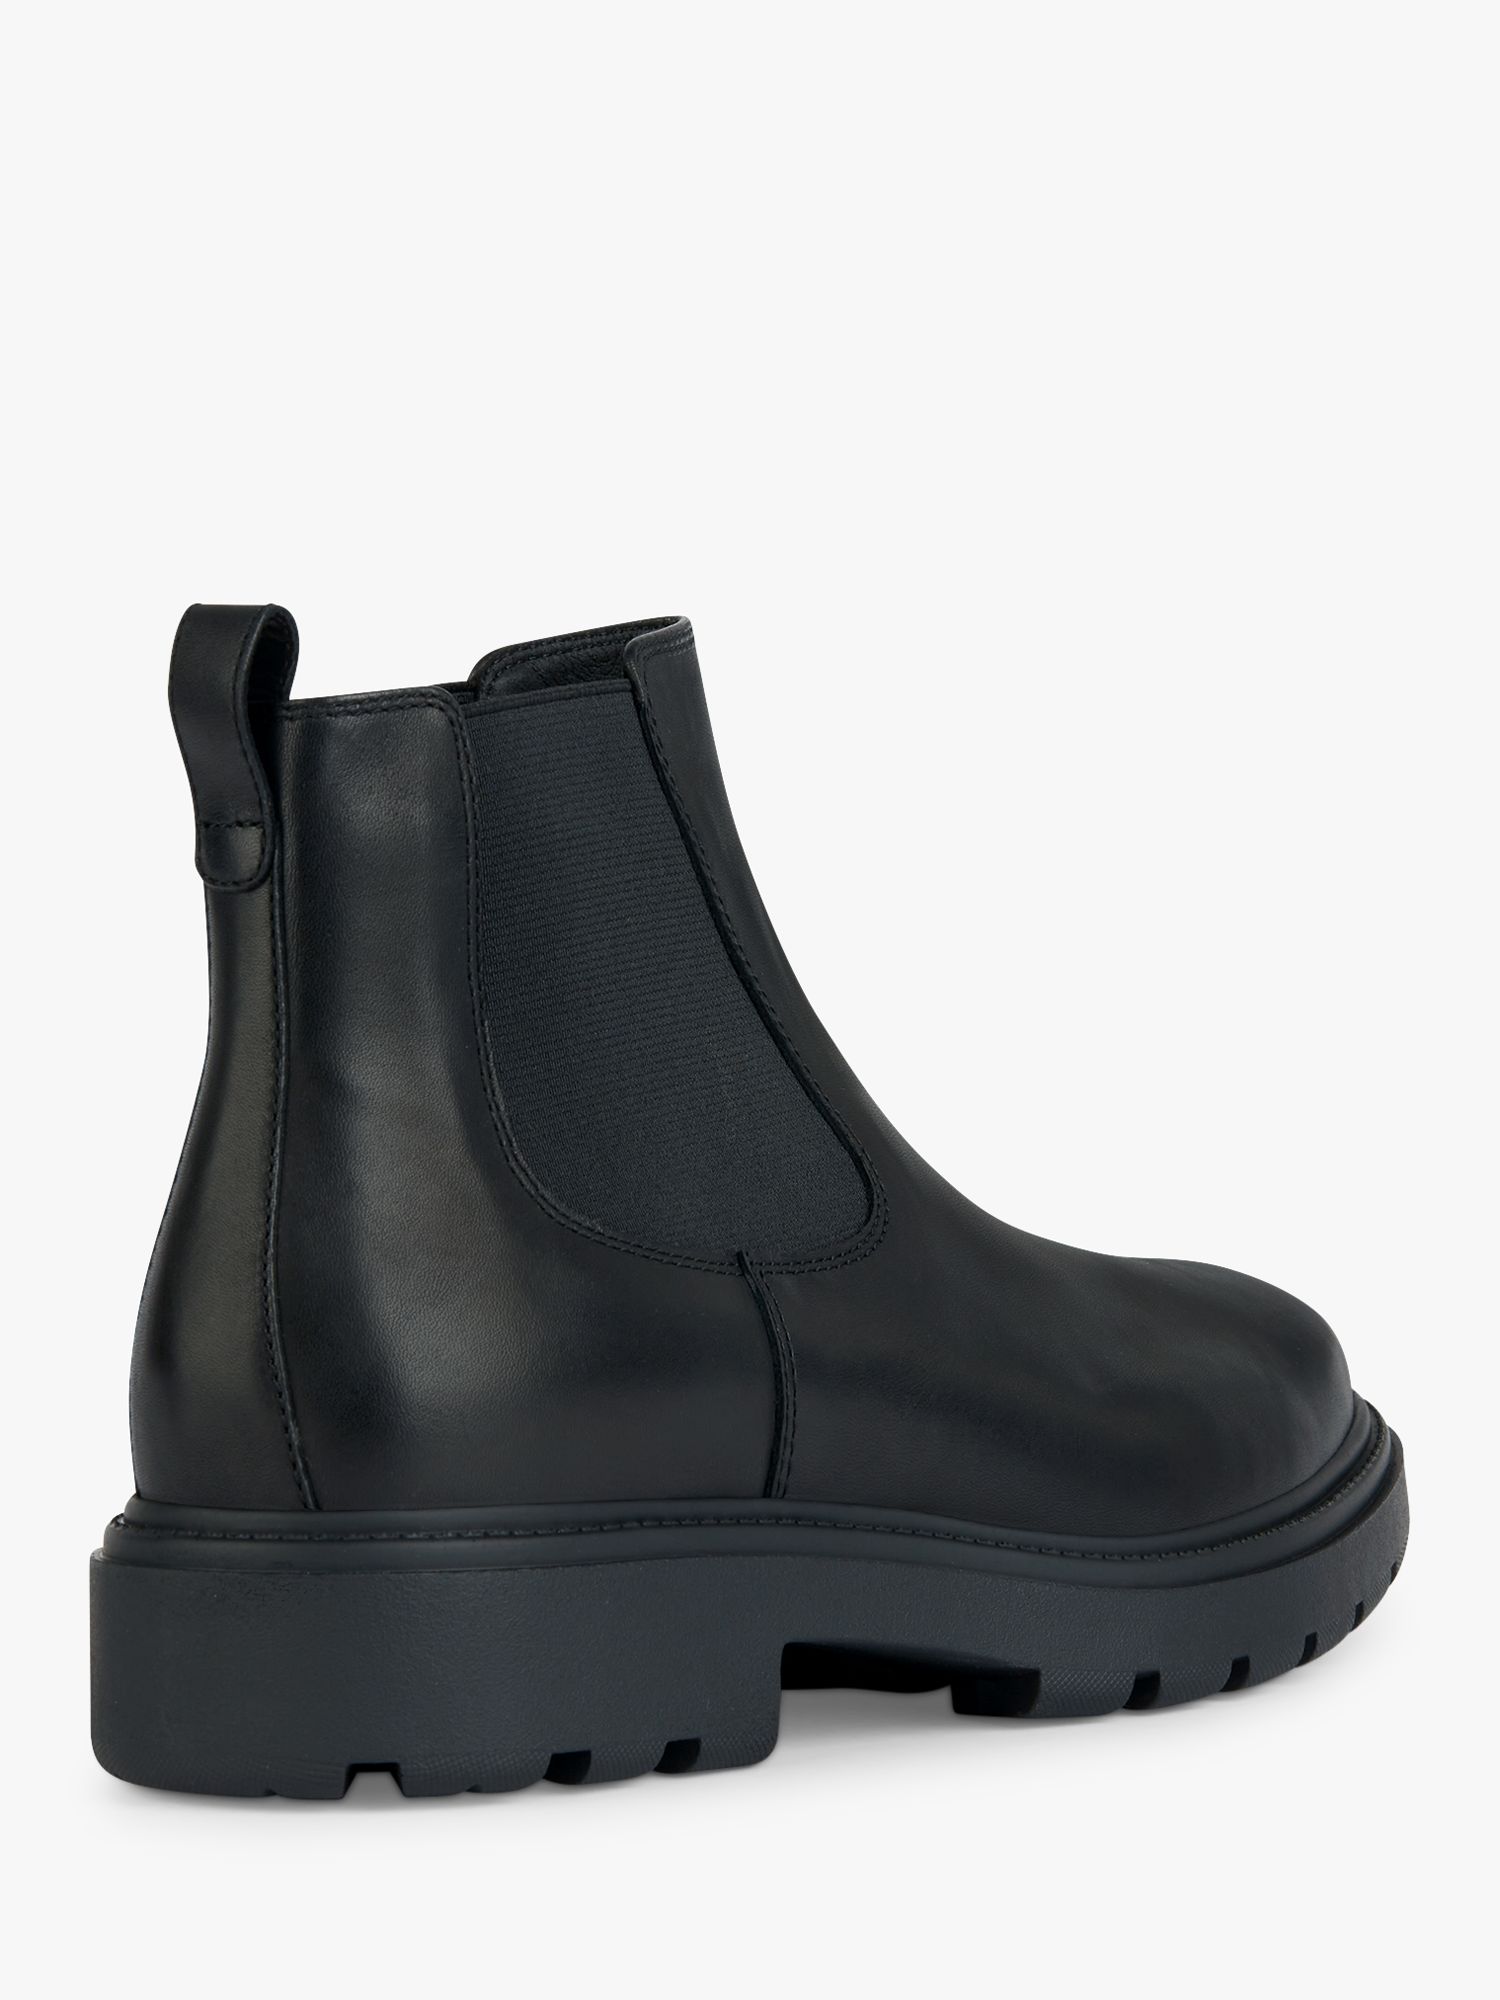 Geox Spherica Wide Fit EC7 Leather Ankle Boot, Black at John Lewis ...